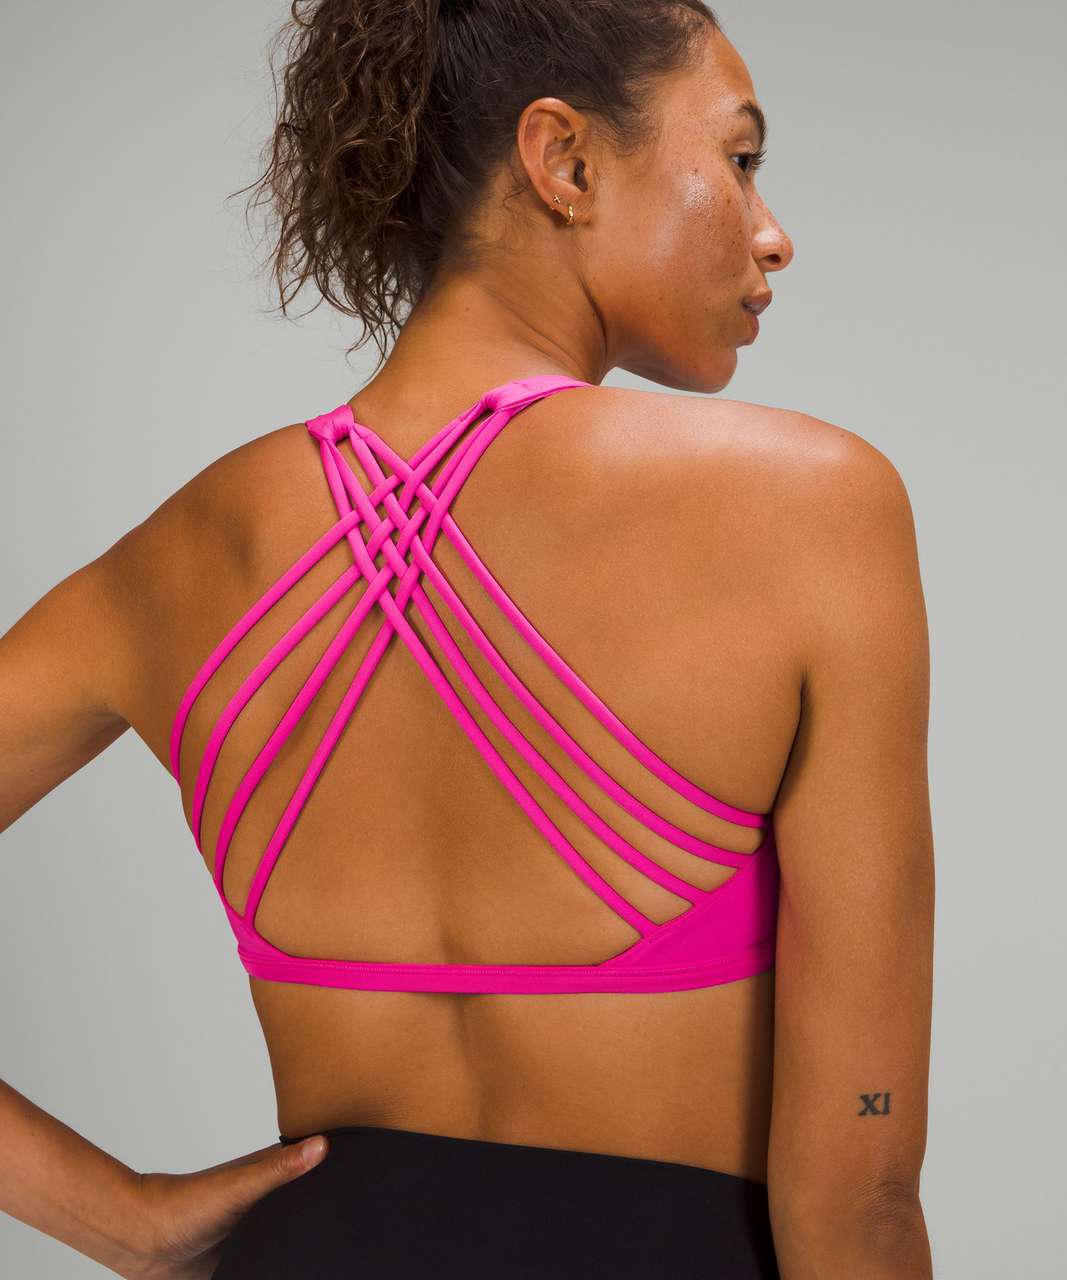 Lululemon Free to Be Bra - Wild *Light Support, A/B Cup - Pow Pink